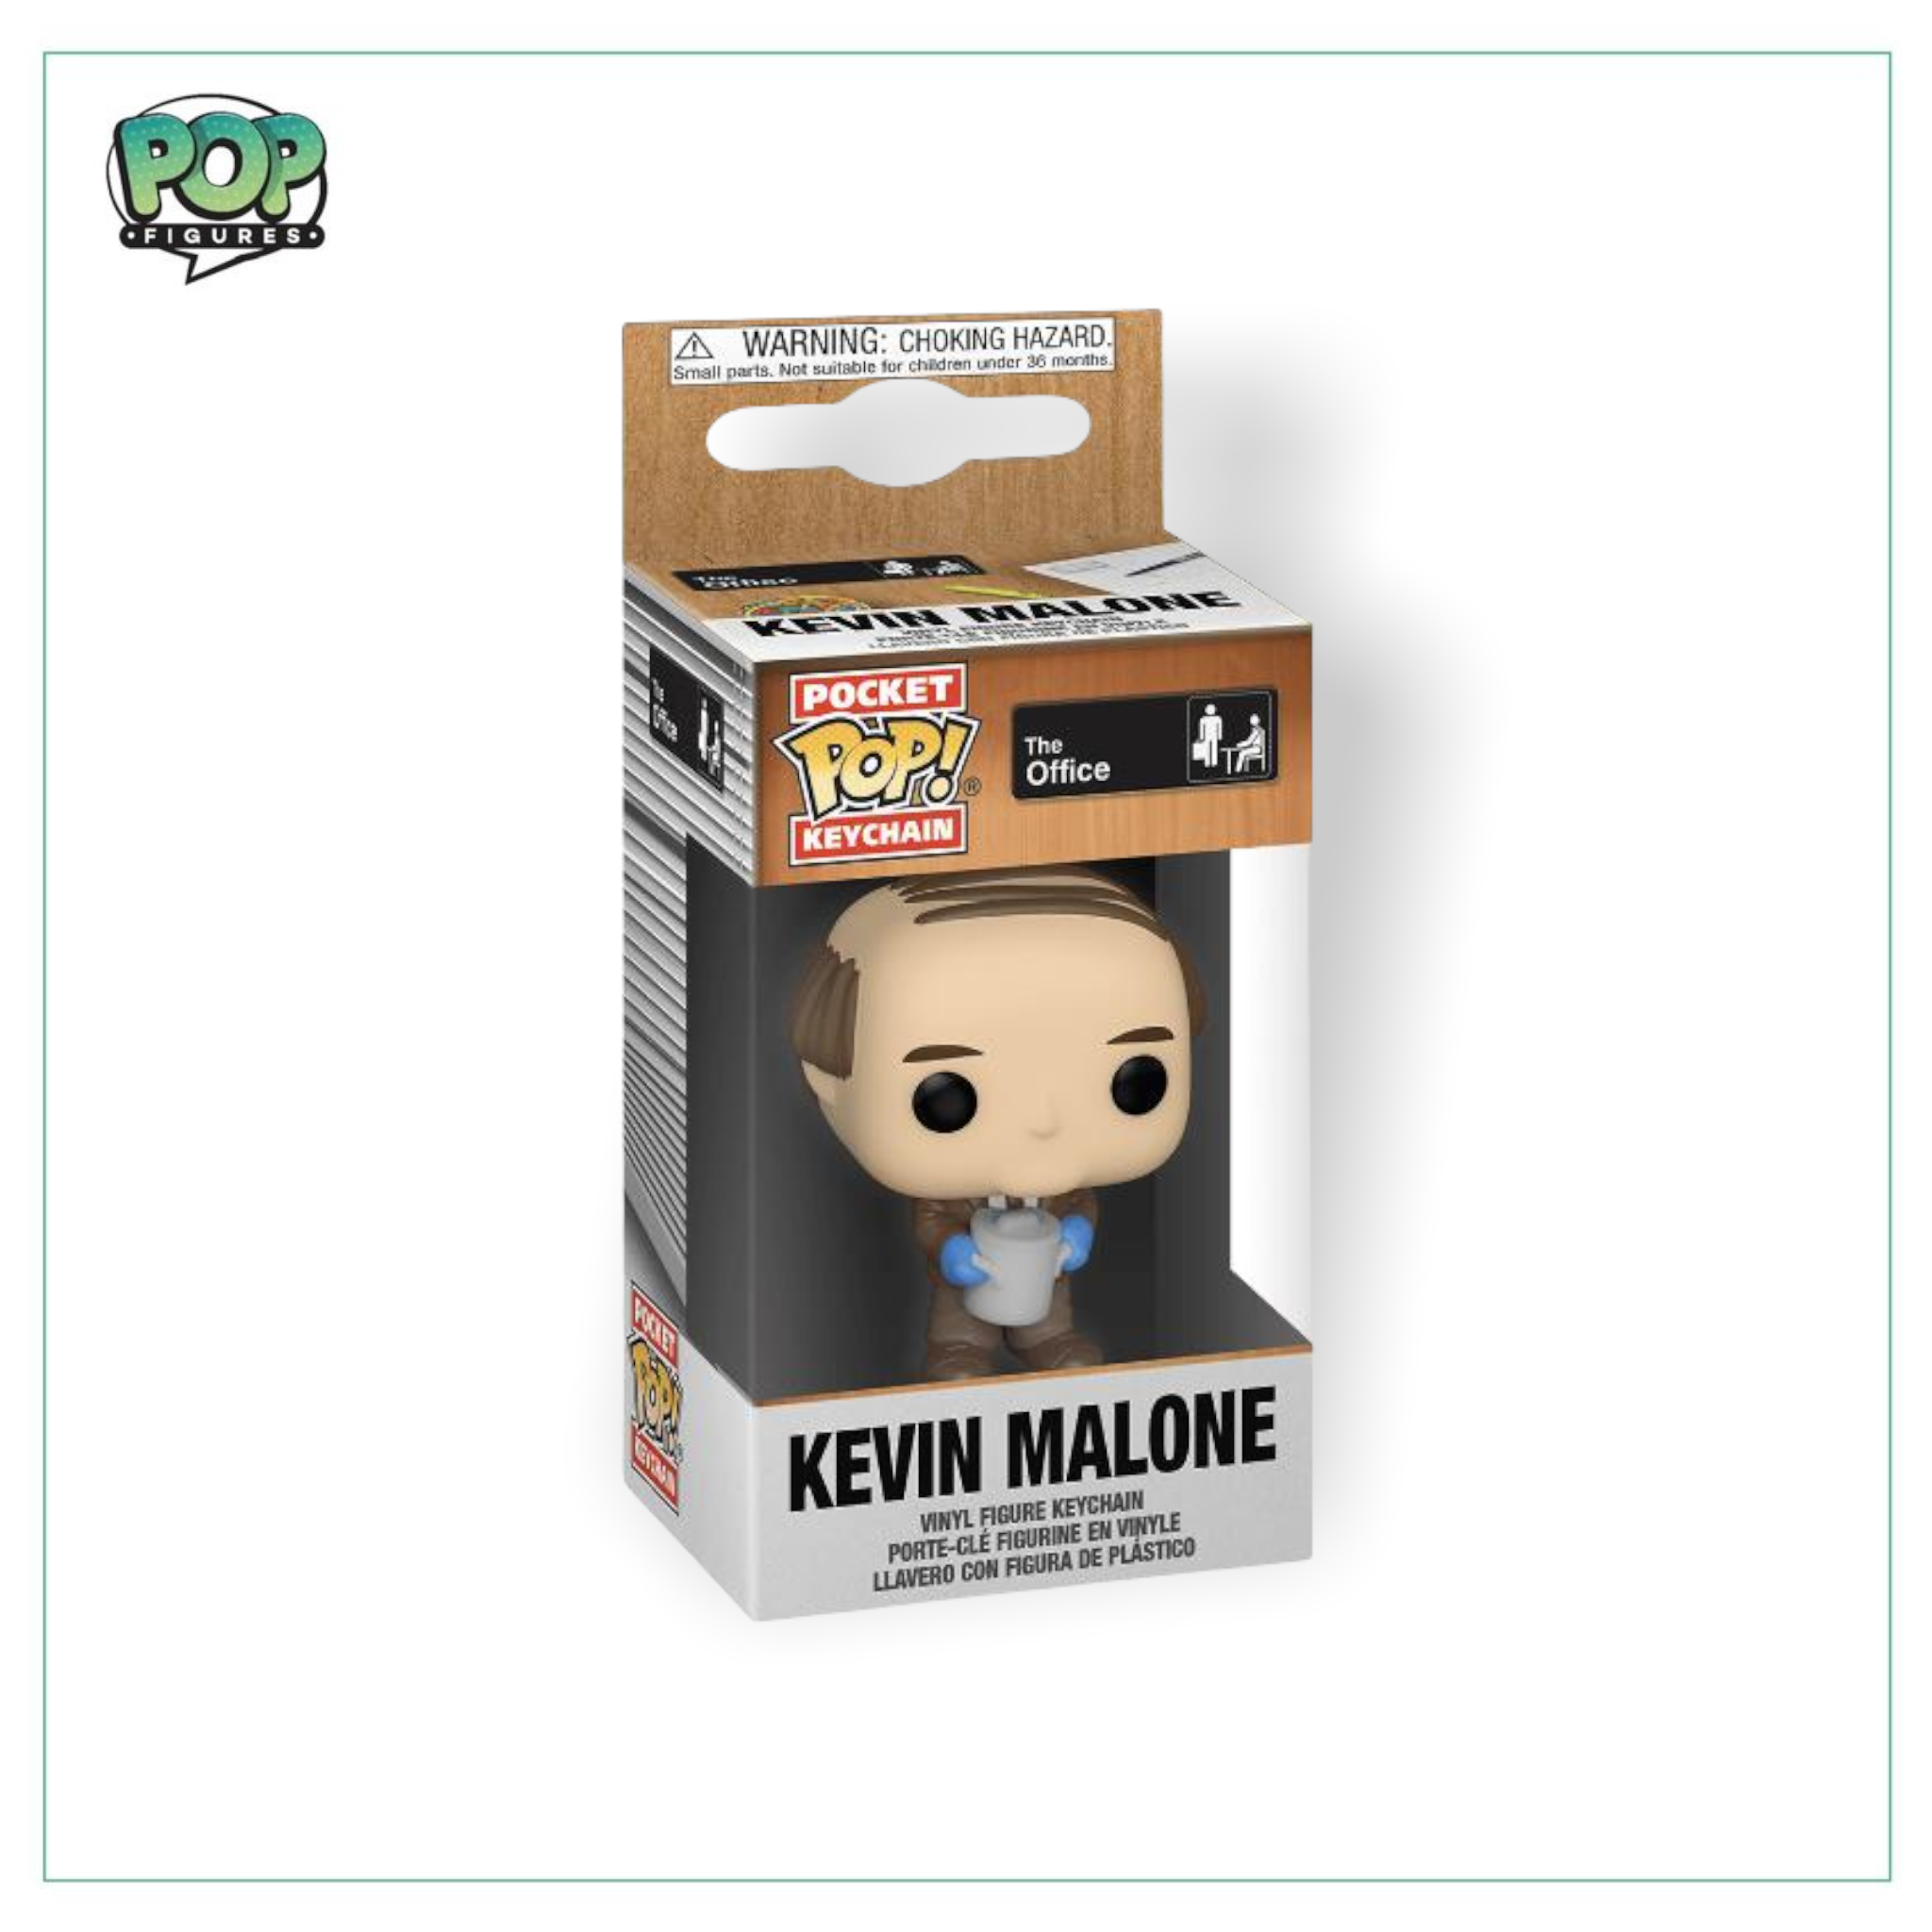 Kevin Malone Pocket Pop Keychain! - The Office